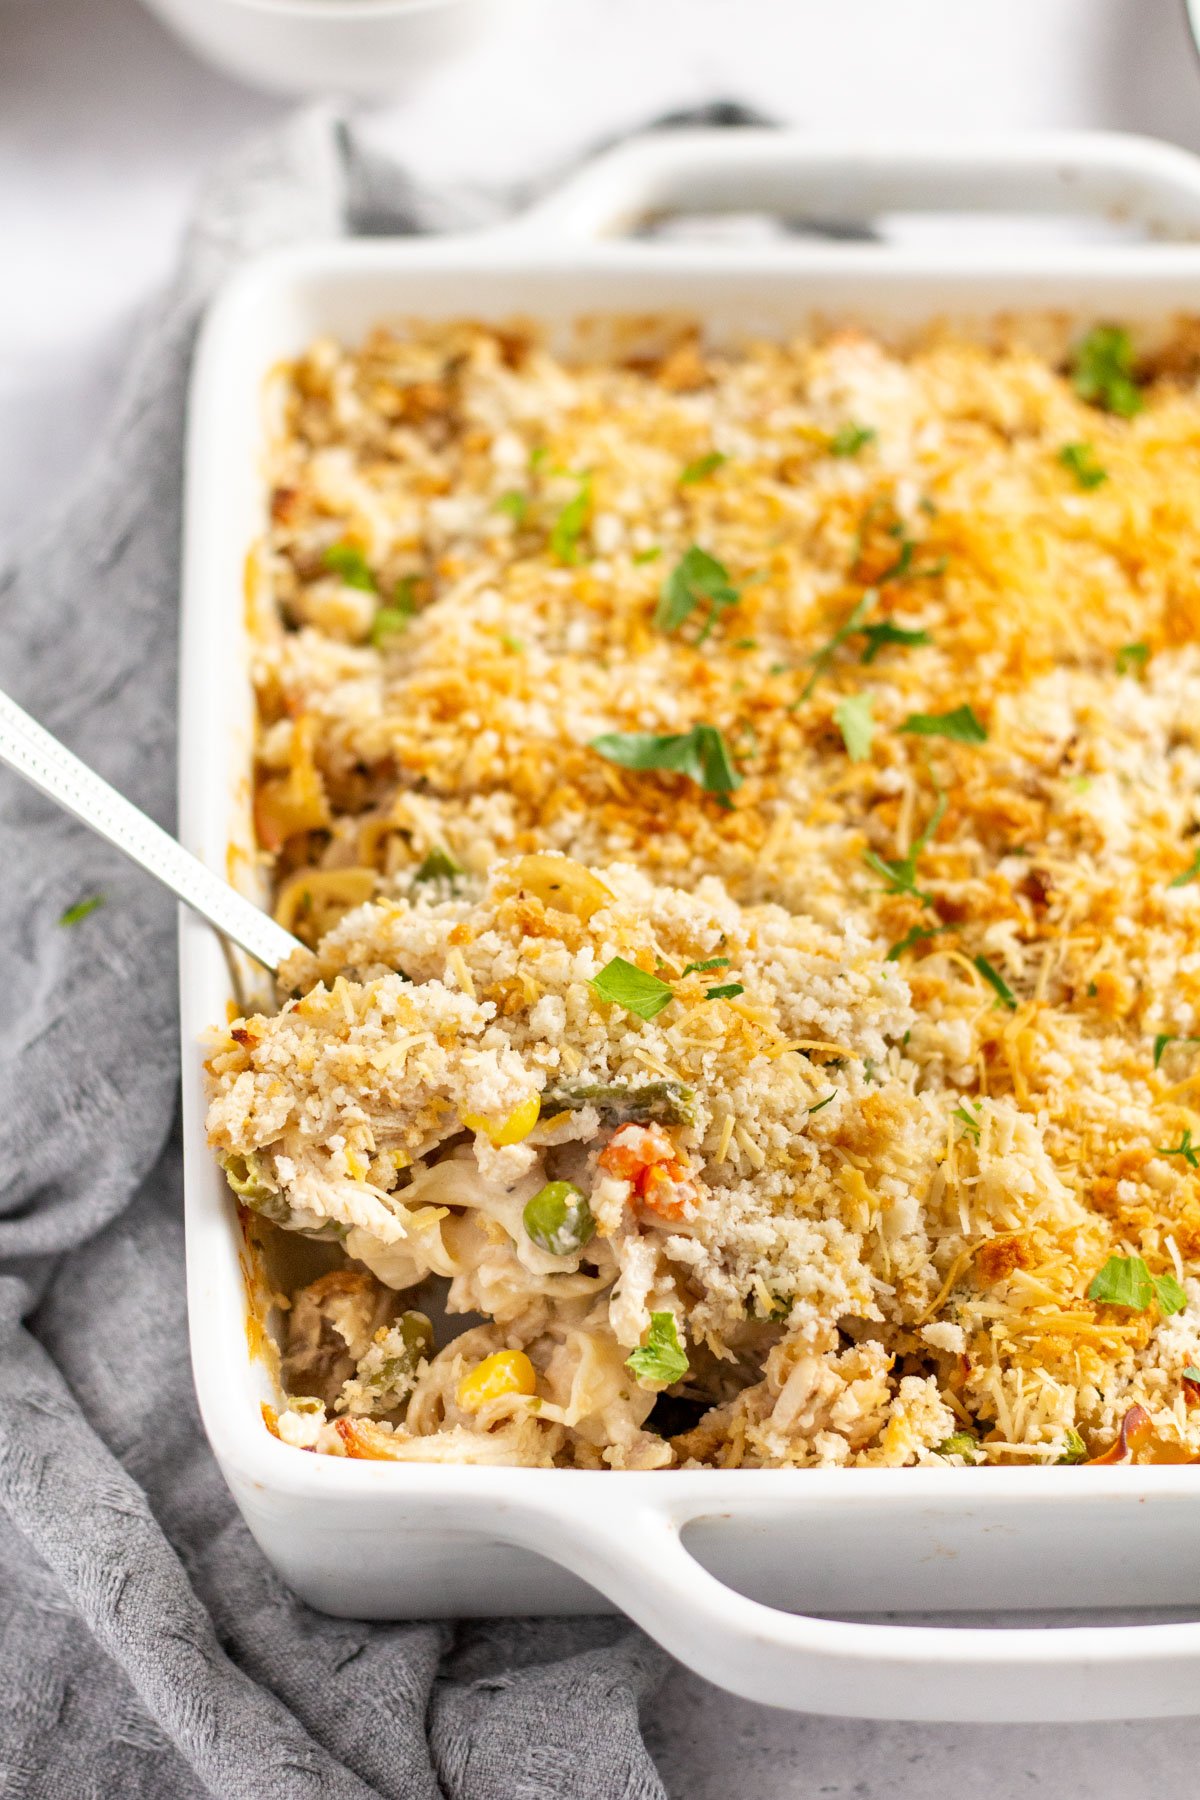 This chicken noodle casserole is a comforting and easy recipe for a weeknight dinner the whole family will love. It has all of the cozy chicken soup flavors, but cooked together with the vegetables in a creamy sauce! It's a great way to use up leftover chicken or a rotisserie chicken, and reheats well so it makes tasty leftovers! #chickennoodle #casserole #chickencasserole #pastabake #leftoverchicken